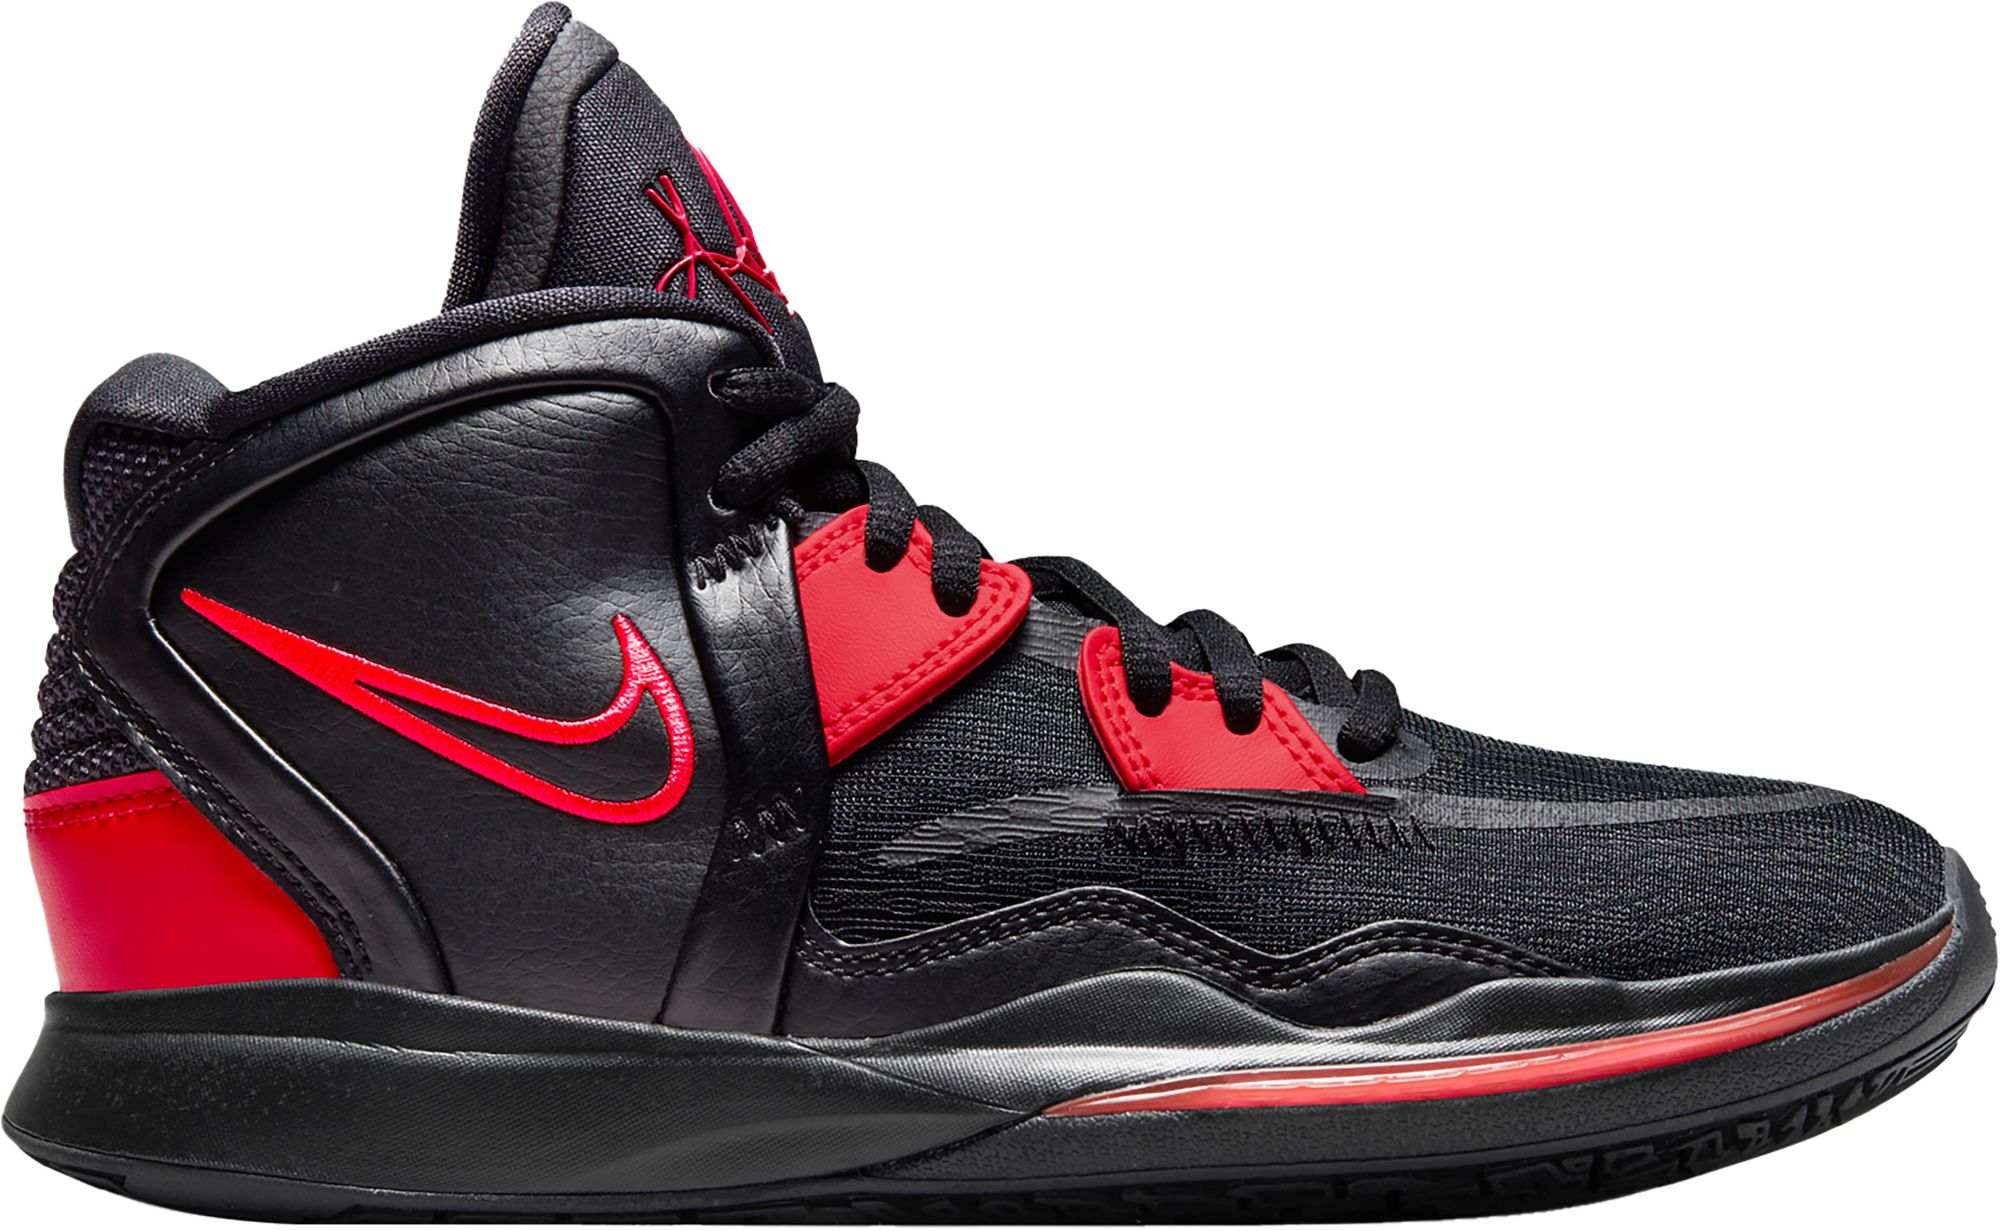 kyrie irving shoes black red